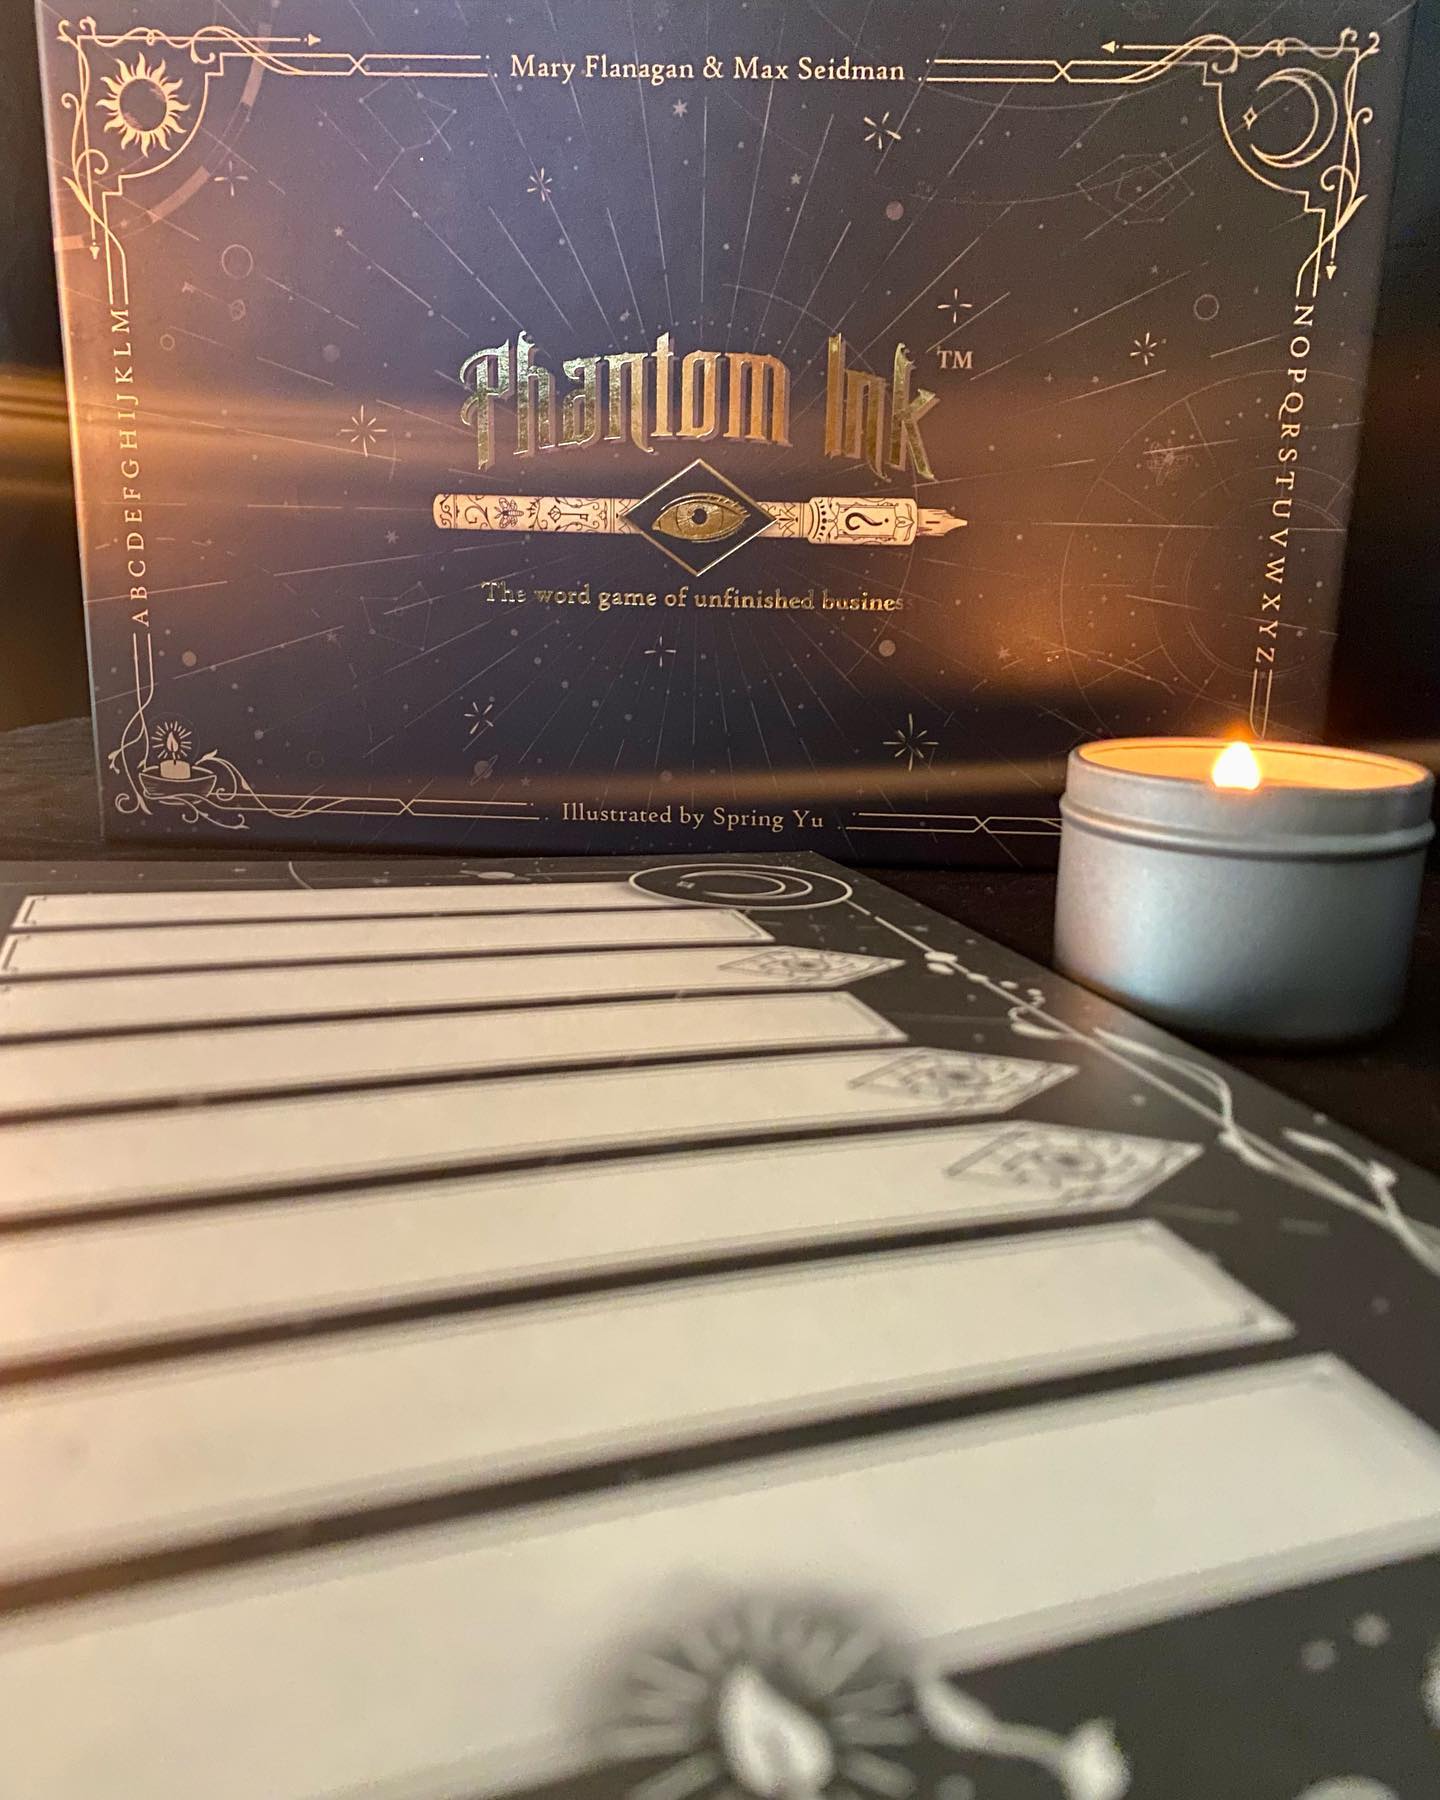 Still waiting on your chance to speak with spirits? The folks at @queertabletops can help with that! They’re giving away a copy of Phantom Ink to one lucky follower. Check out their latest post for details on how to win, but be quick! Their connection to the spirit world ends on April 18 👻

#boardgames #boardgamegiveaway #giveaway #games #partygames #boardgamephotography #tabletopgames #bgg #graphicdesign #resonym #cardgames #ghost #ouija #giveawaycontest